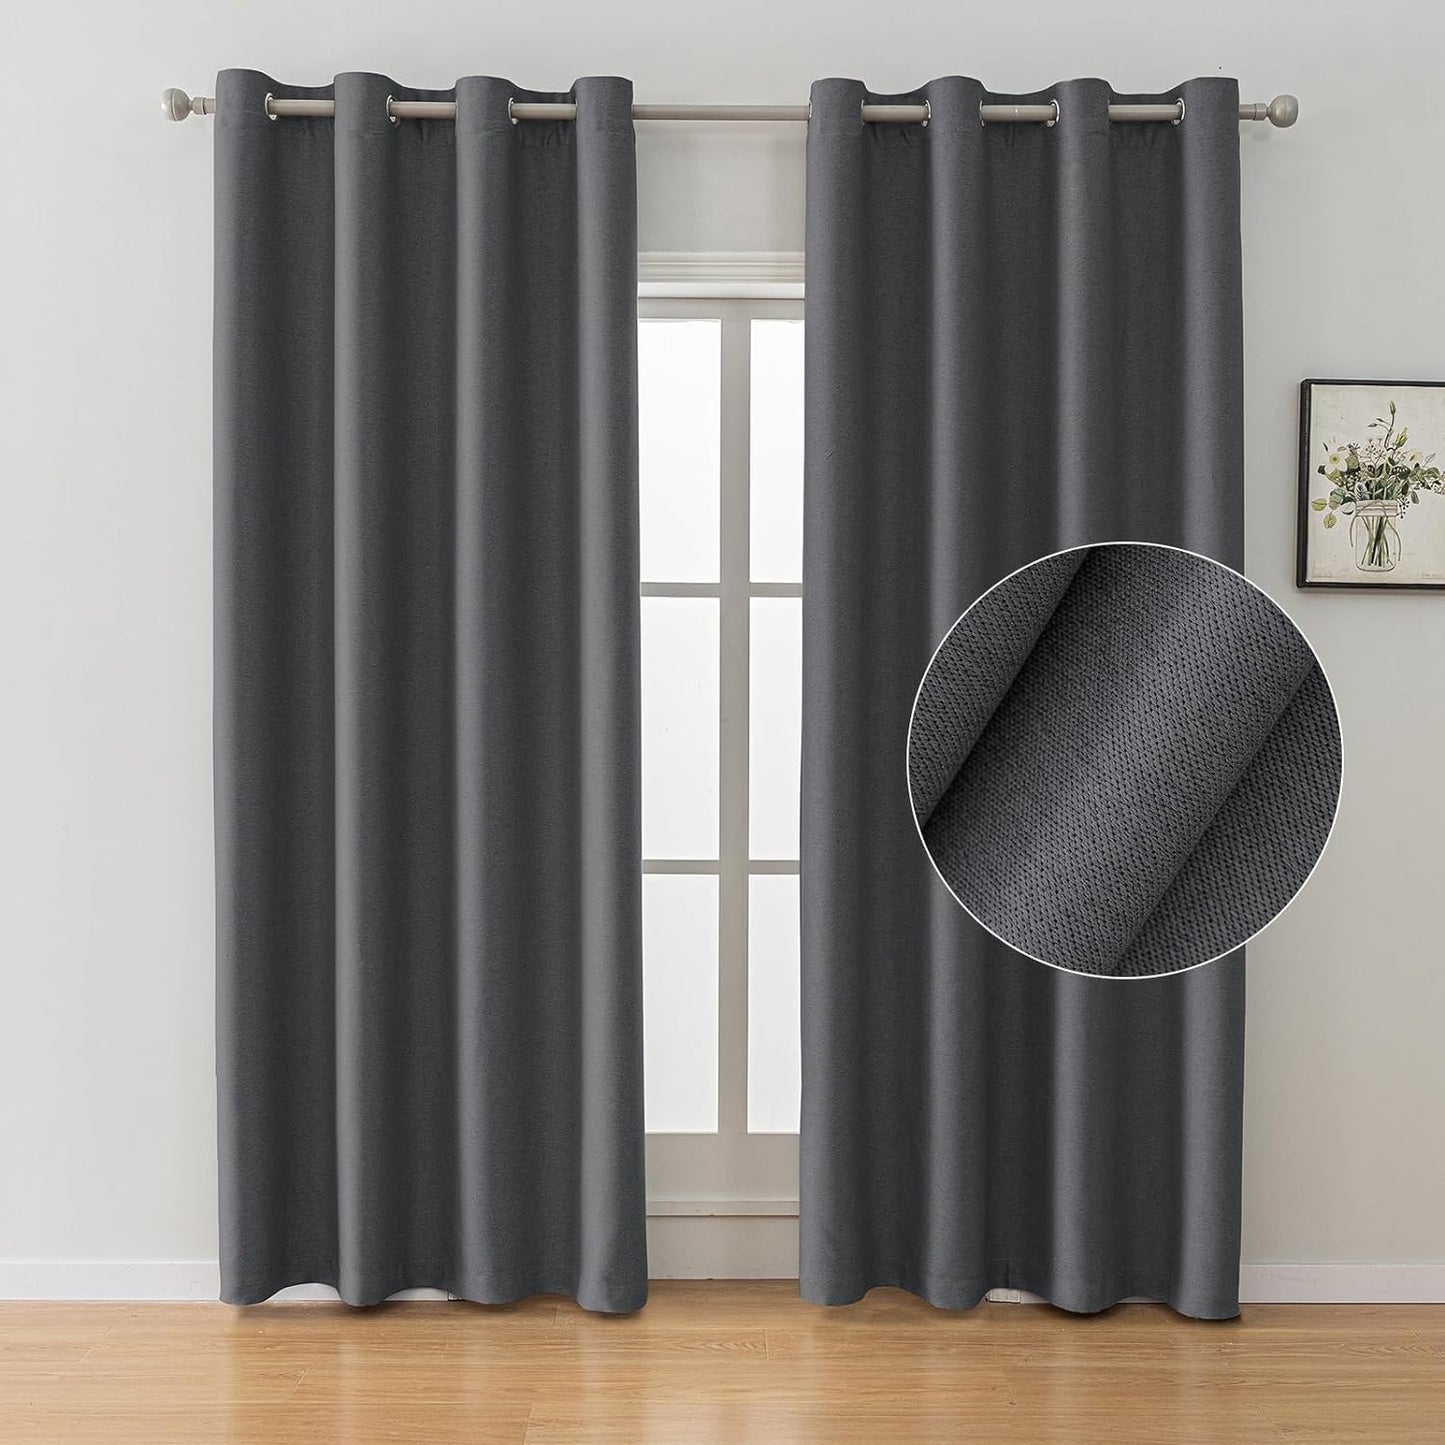 SYSLOON Natural Linen Curtains 72 Inch Length 2 Panels Set,Blackout Curtains for Bedroom Grommet,Thermal Insulated Room Darkening Curtains for Living Room,Long Drapes 42"X72",Beige  SYSLOON Dark Grey 52X96In （W X L） 